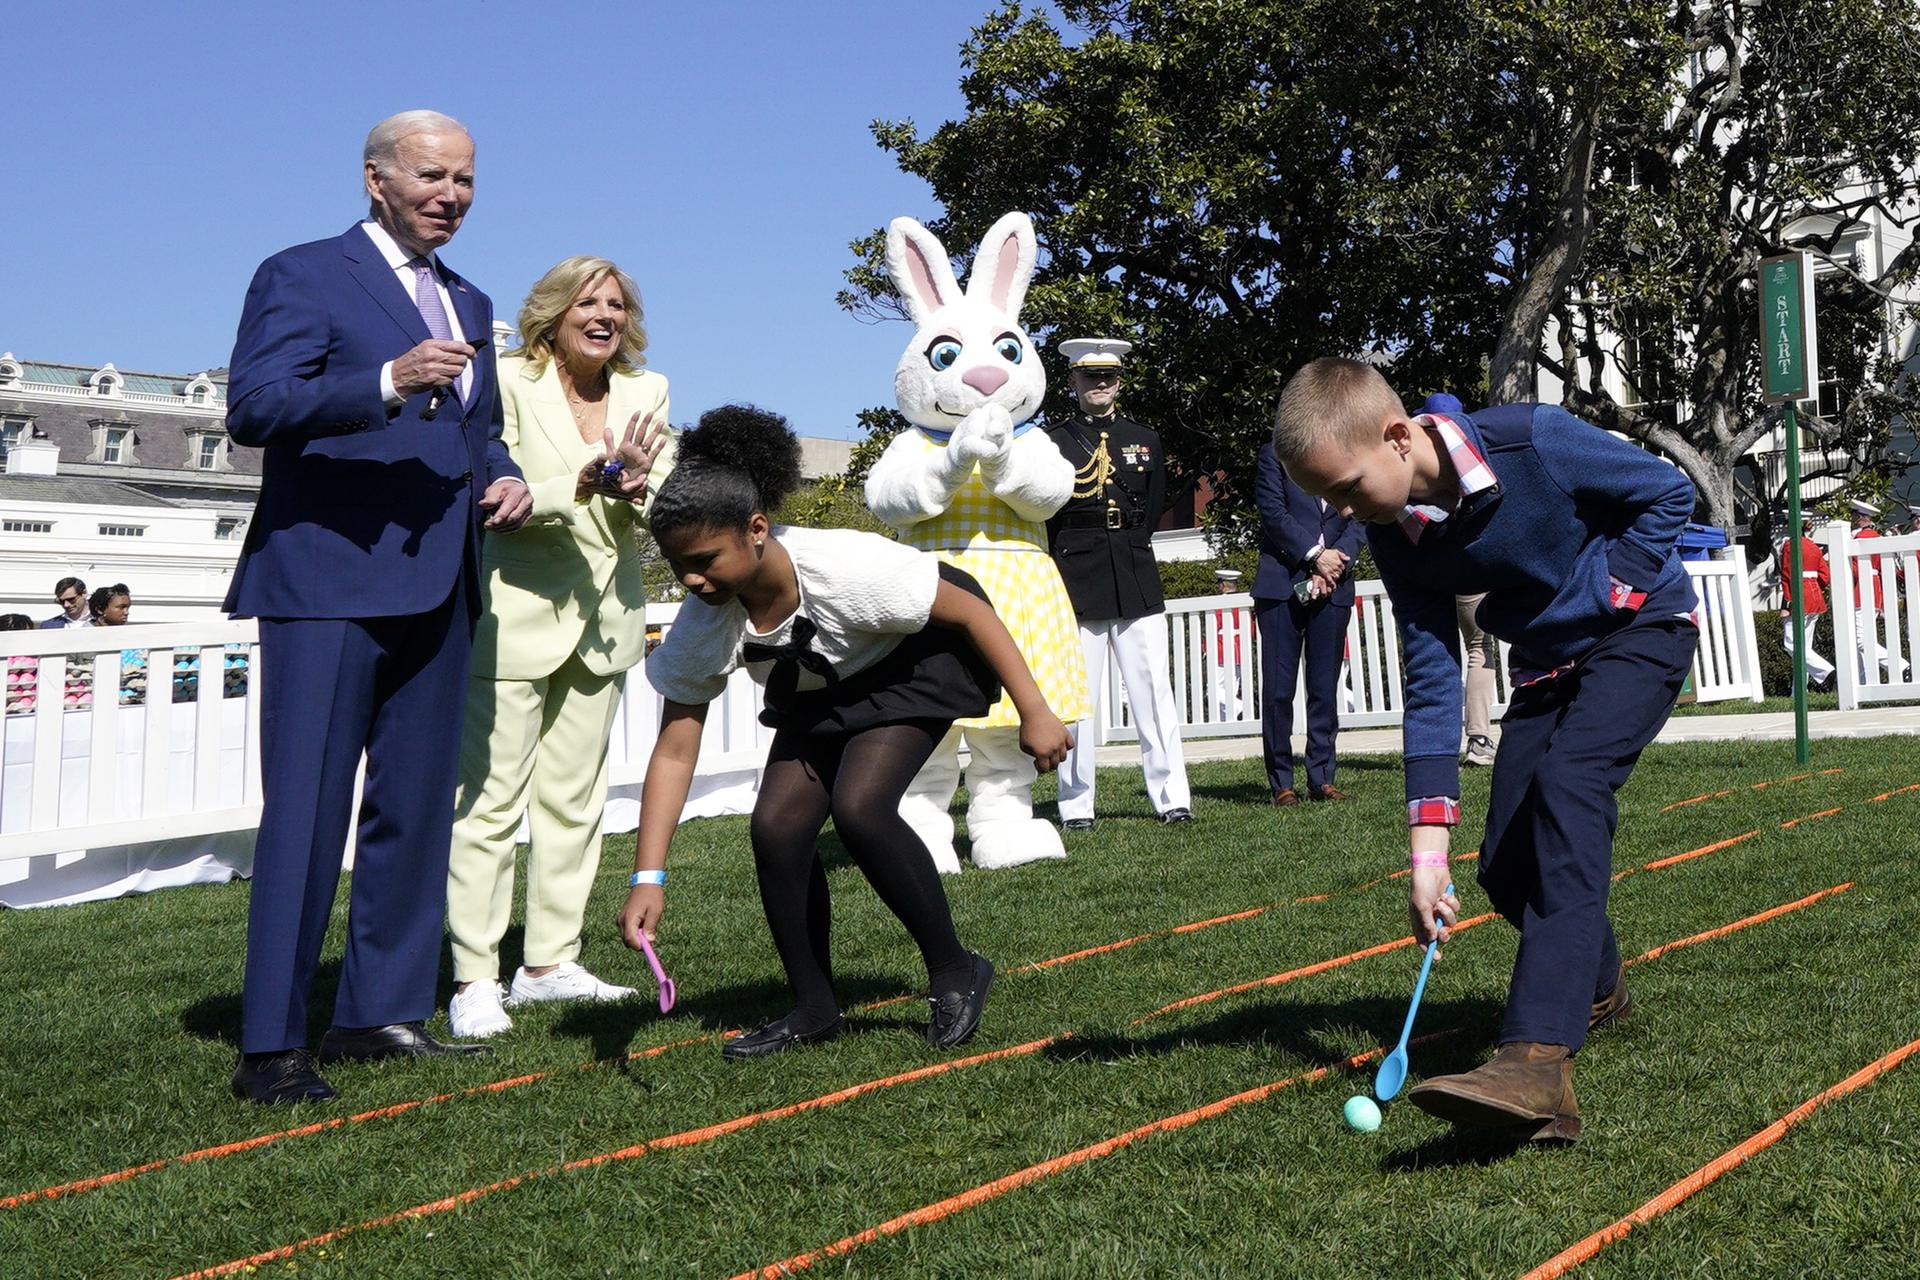 US President Joe Biden and first lady Jill Biden witness one of the Easter Egg Roll events at the White House in Washington DC on 10 April 2023. That tradition at the presidential residence dates back to 1878. EFE/Yuri Gripas/Pool